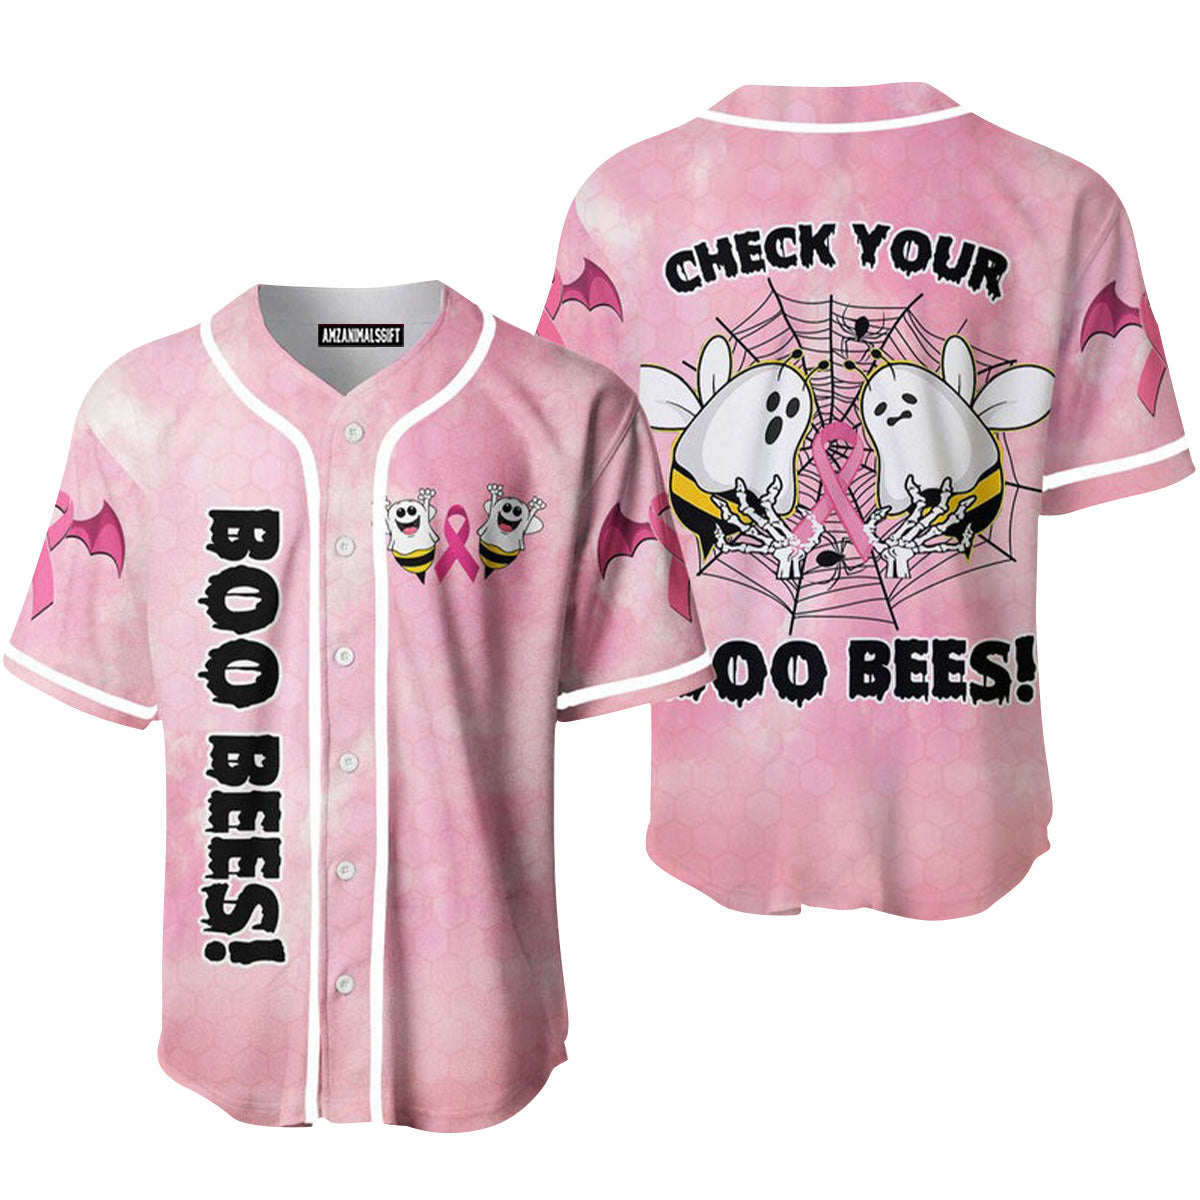 Check Your Boo Bees Breast Cancer Awareness Baseball Jersey, Perfect Outfit For Men And Women On Breast Cancer Survivors Baseball Team Baseball Fans